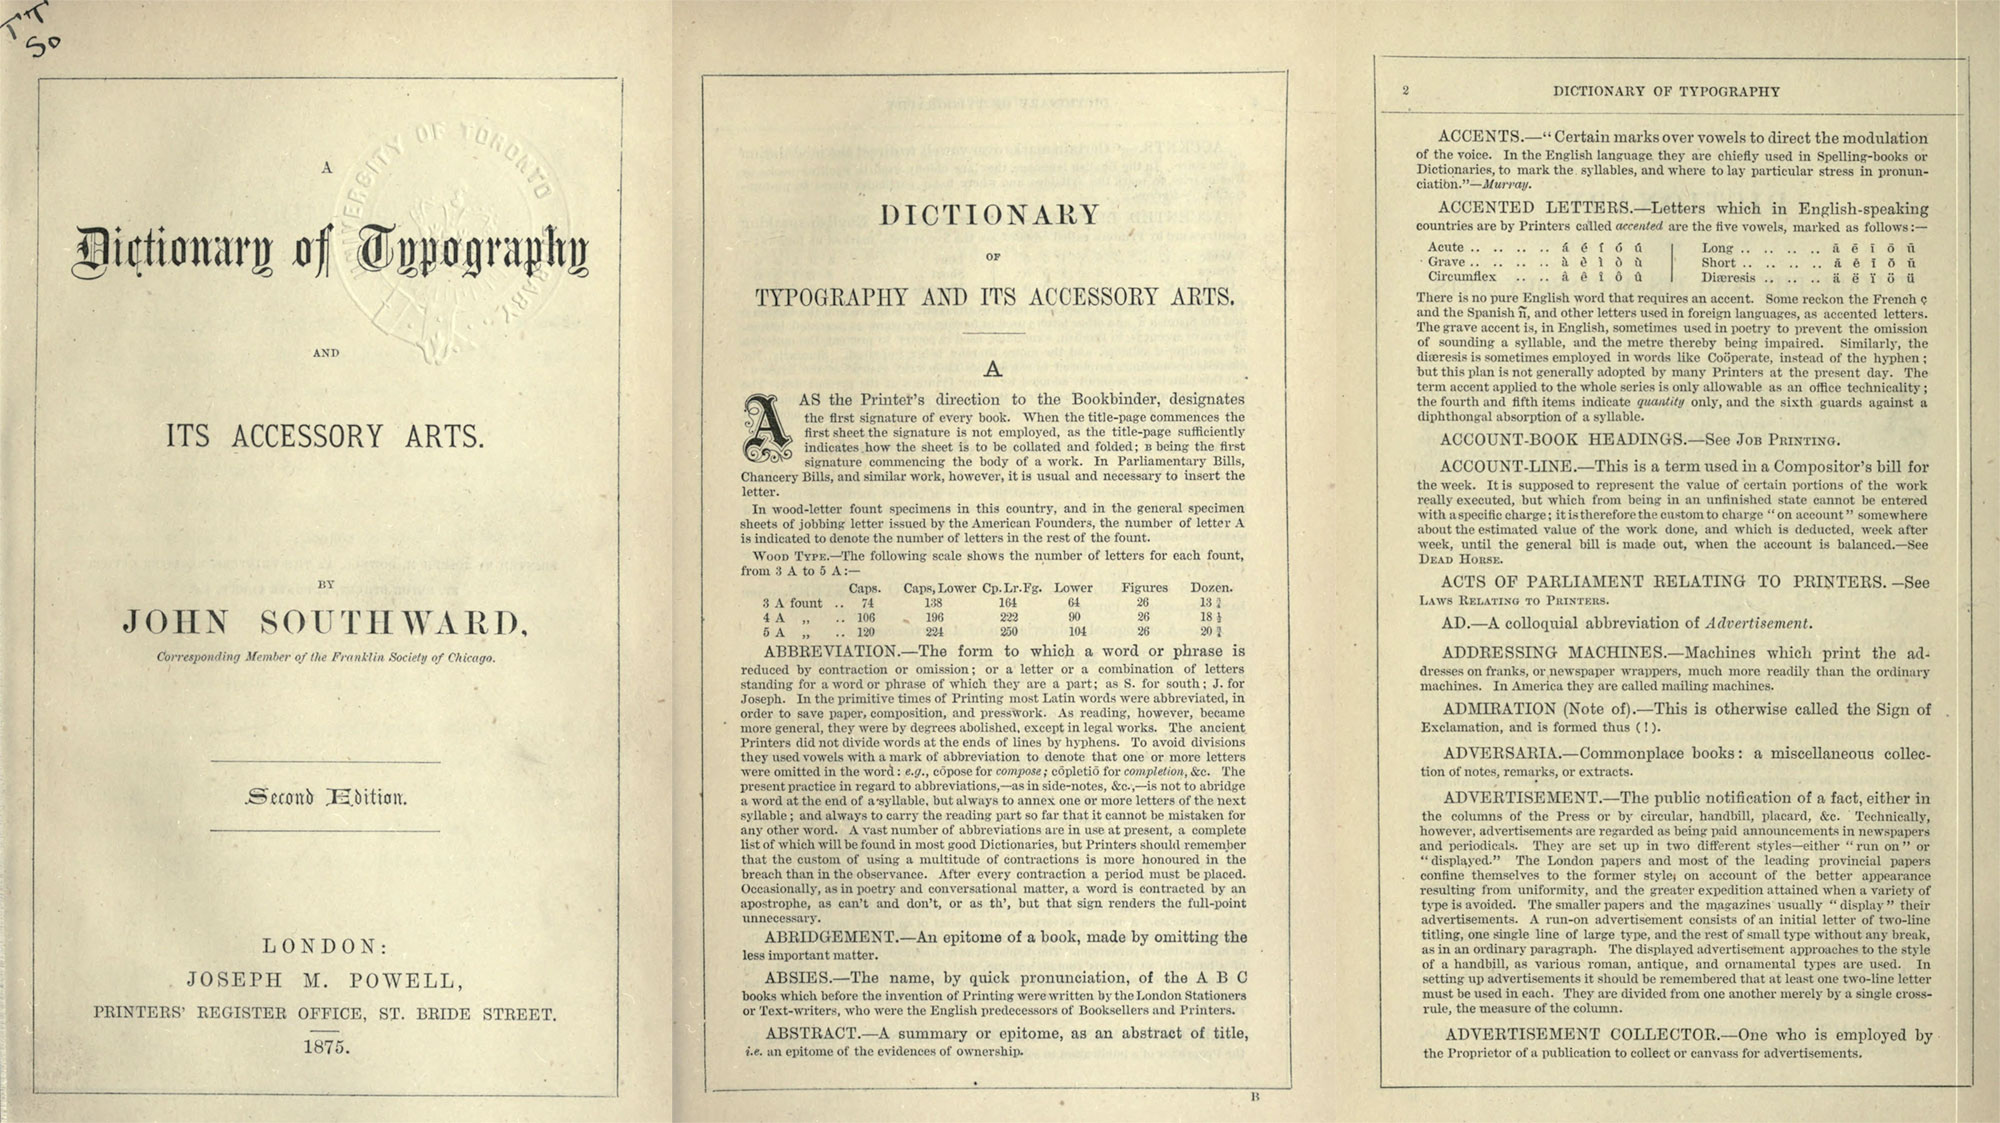 Title page and first two pages of the second edition